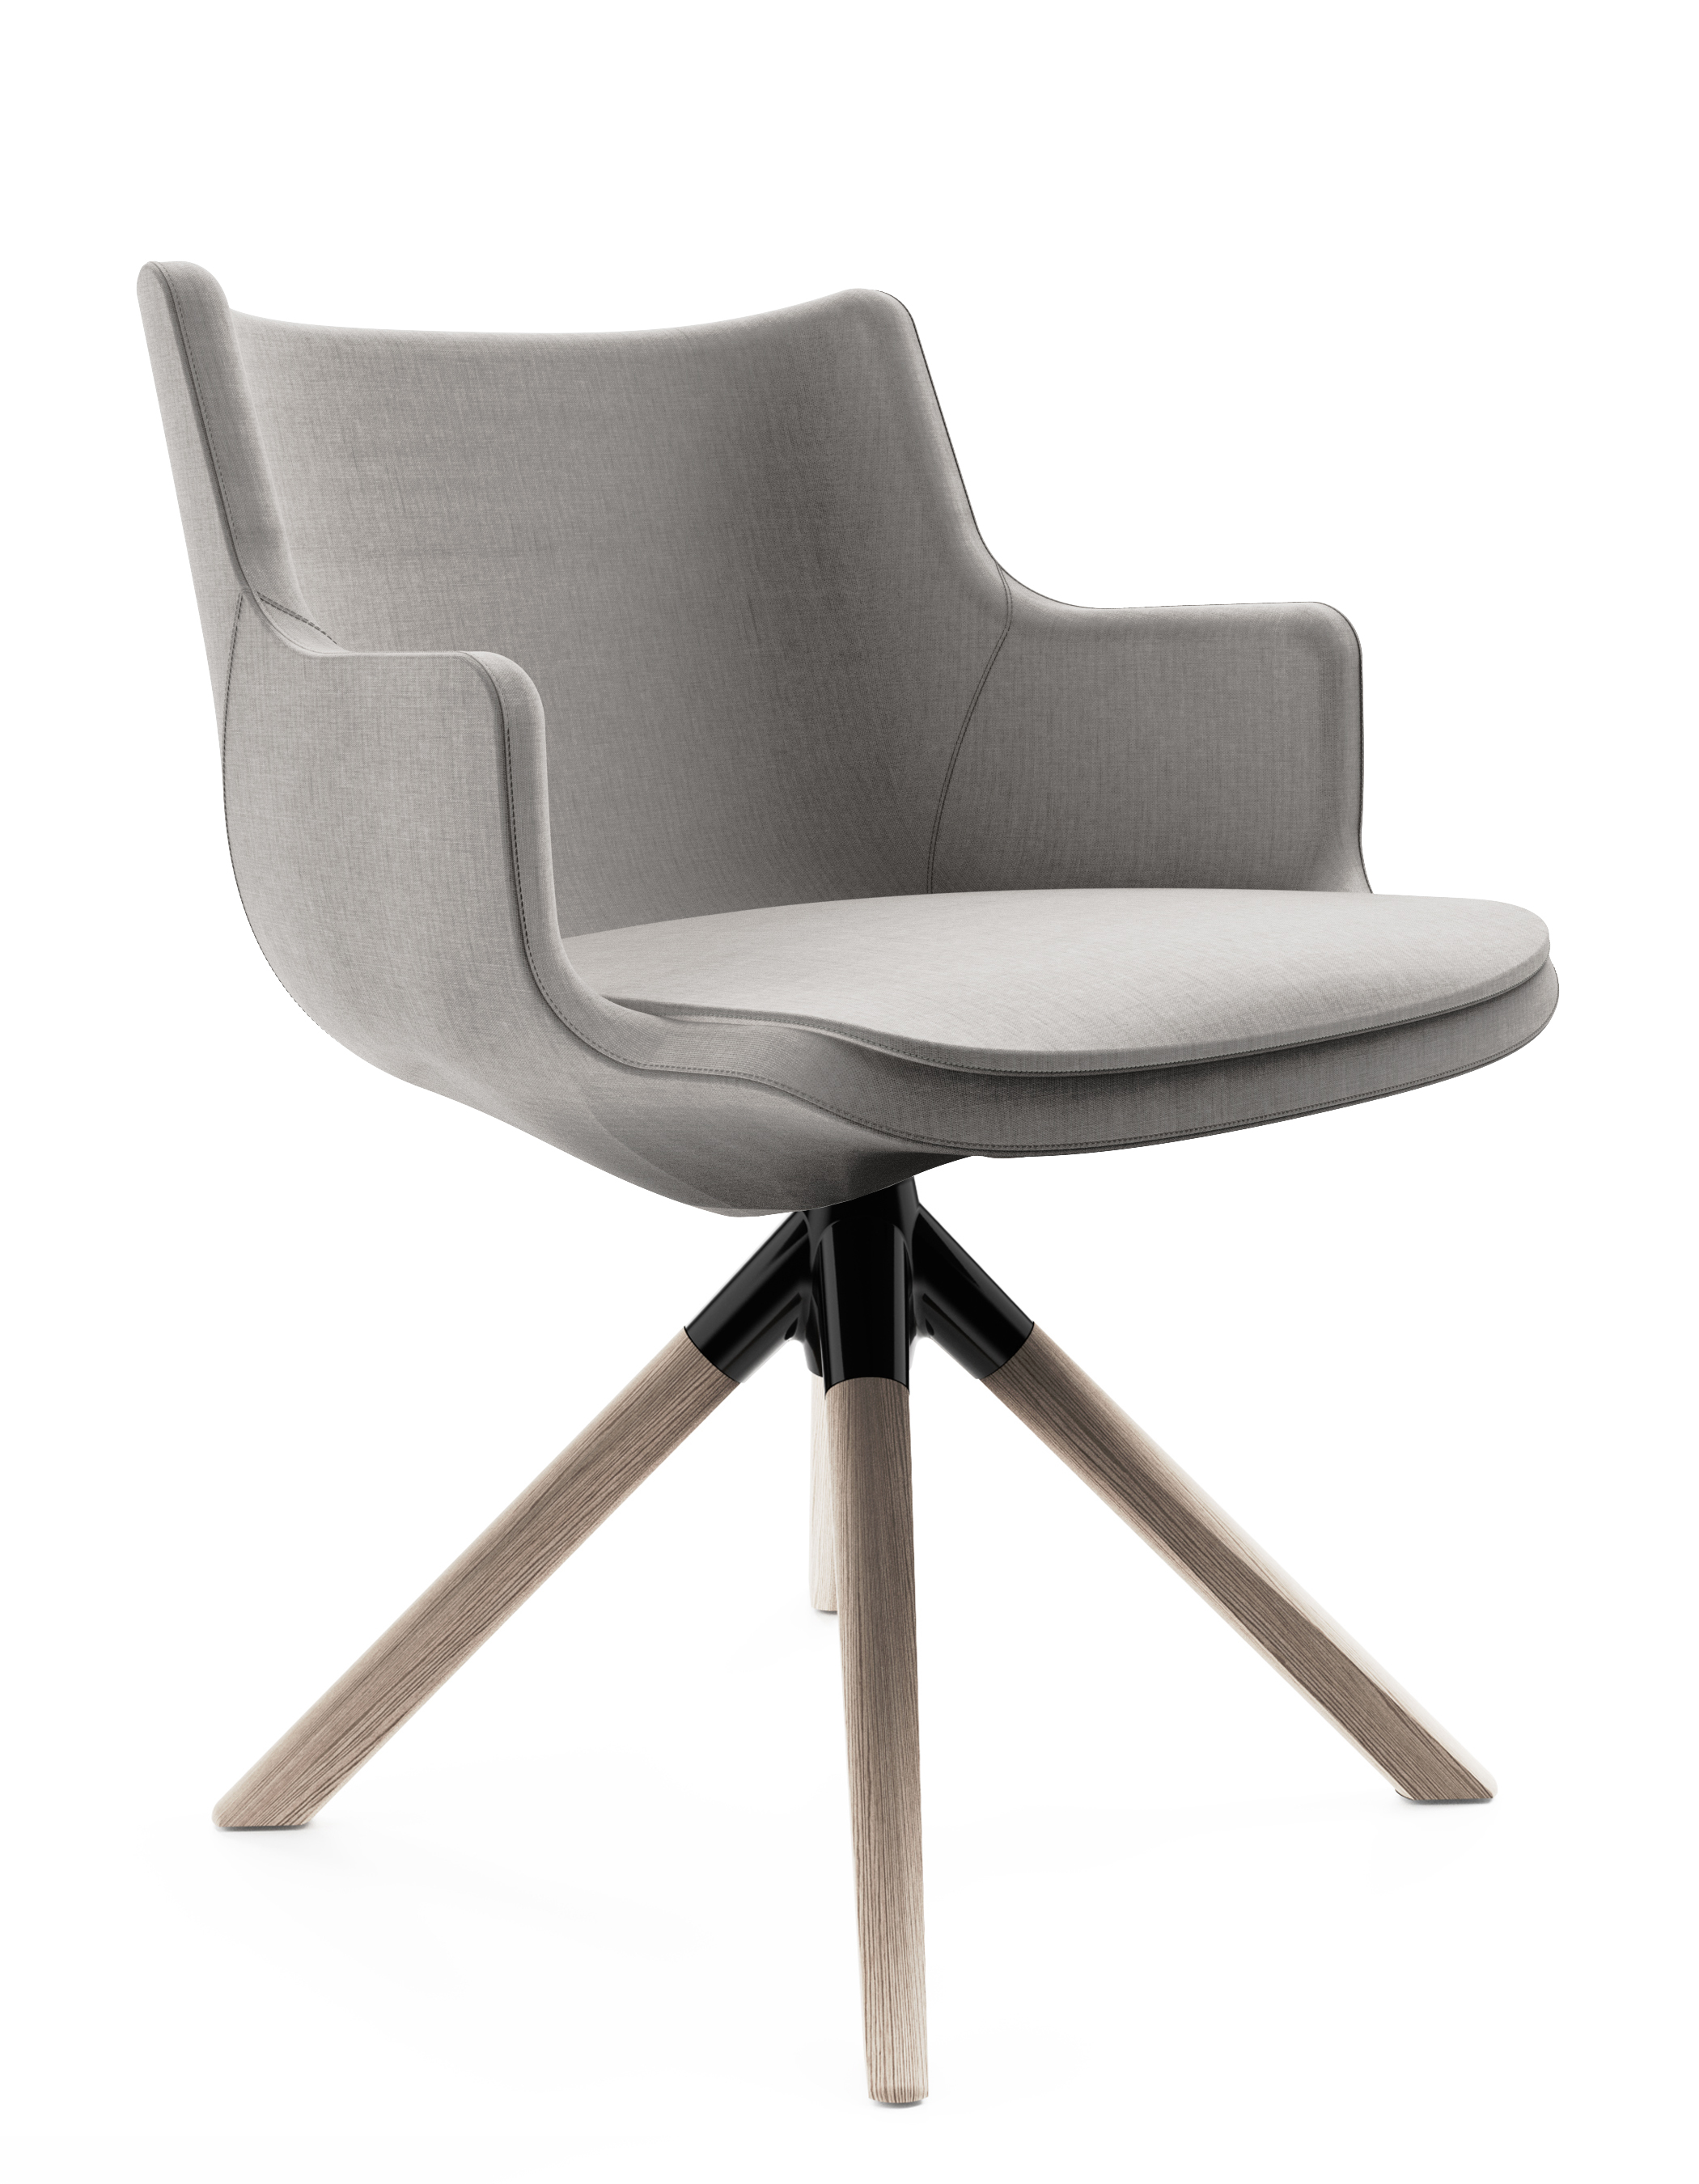 WS - Contour chair - Low, 4 star - black timber base (Front angle)